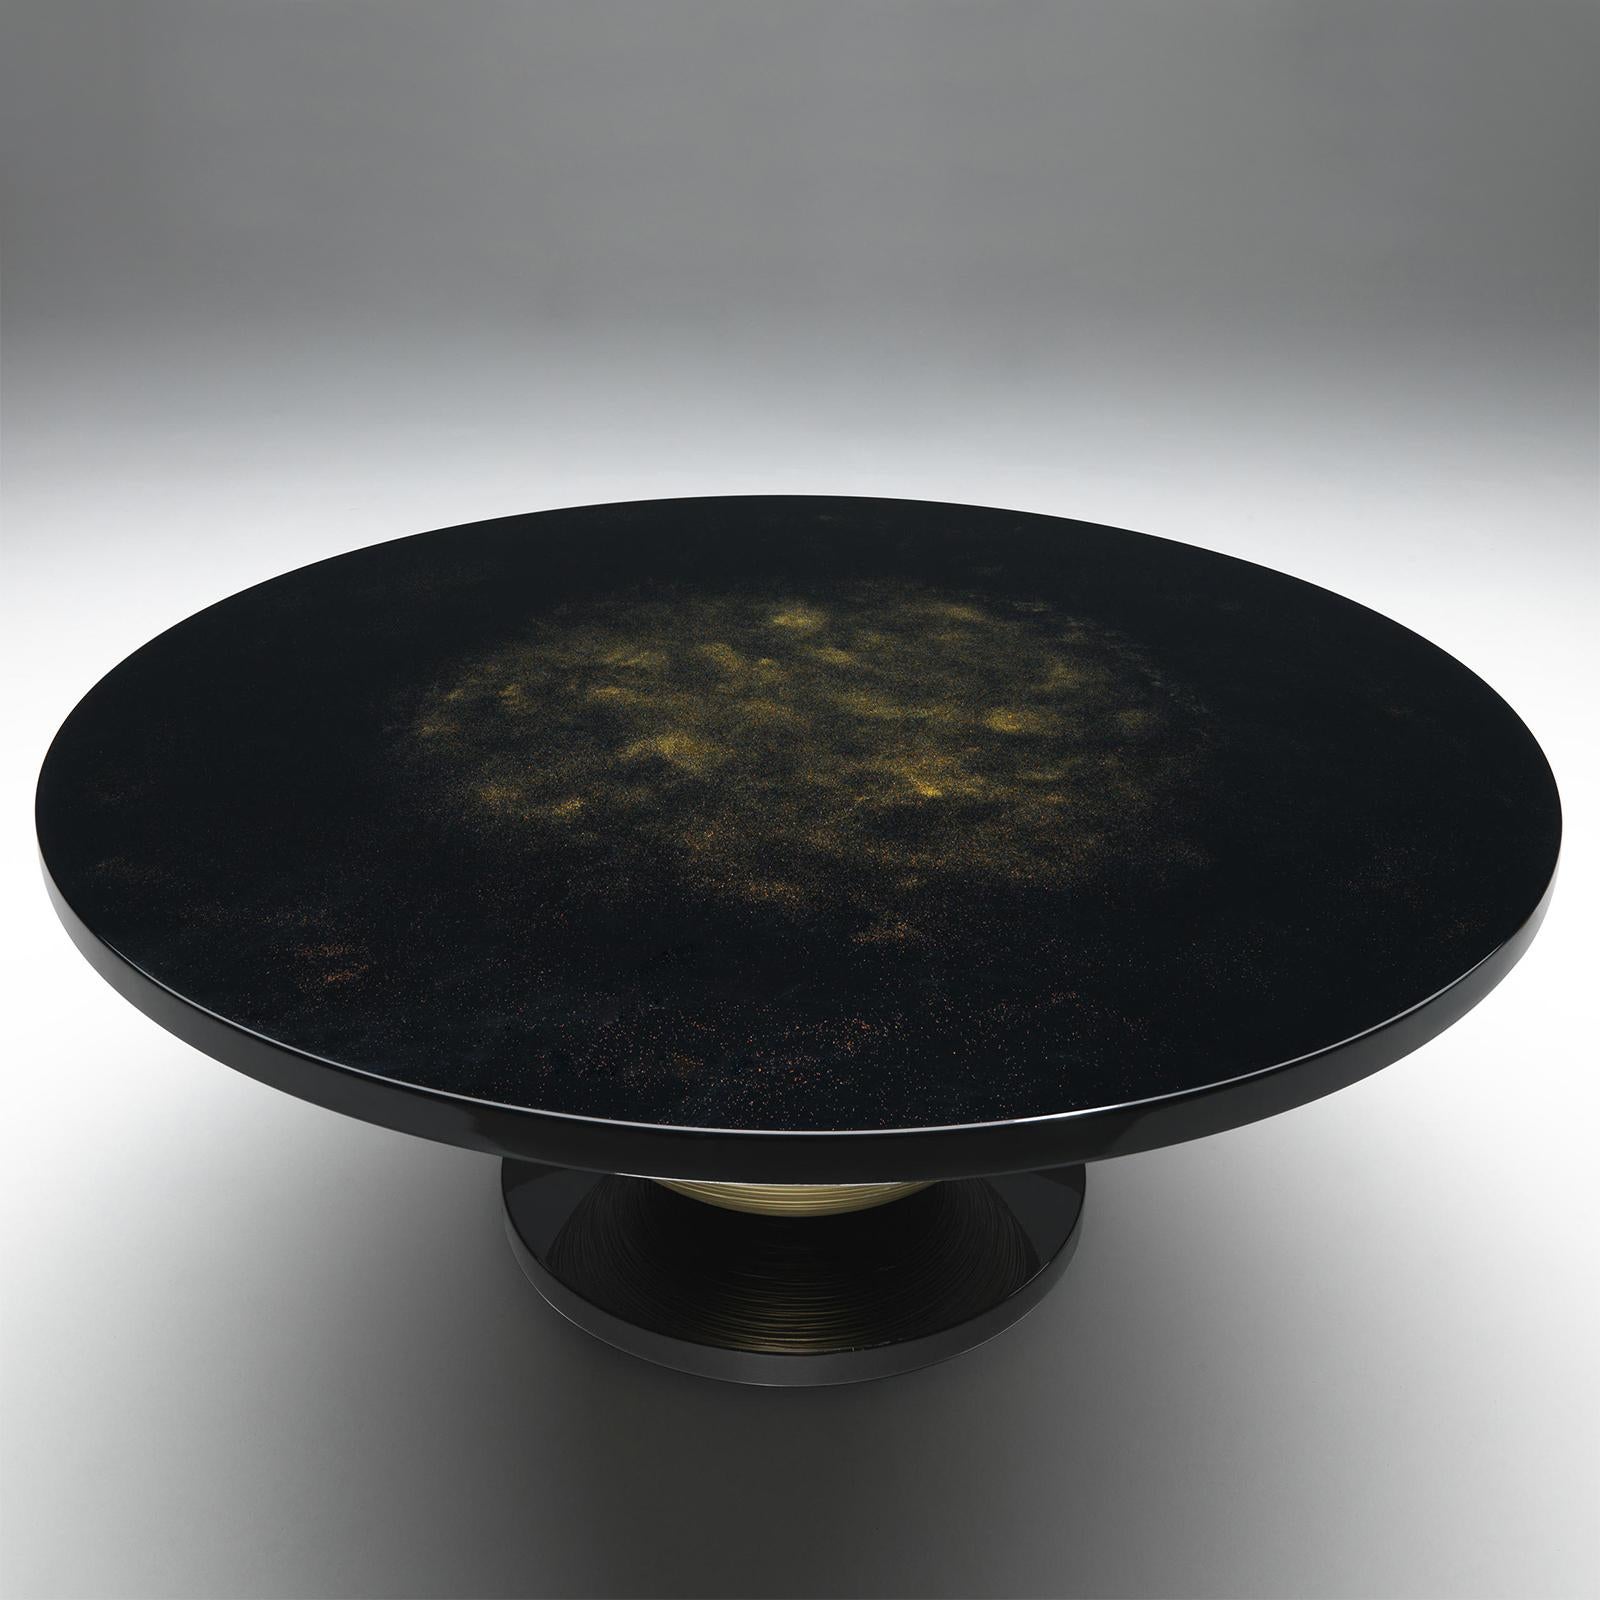 Dining Table Realm Dining with wooden table top in black lacquered finish
including golded pattern. With casted aluminum sphere base with striped
pattern painted in gold in matte finish. With round wooden pedestal in black
lacquered finish.
Also